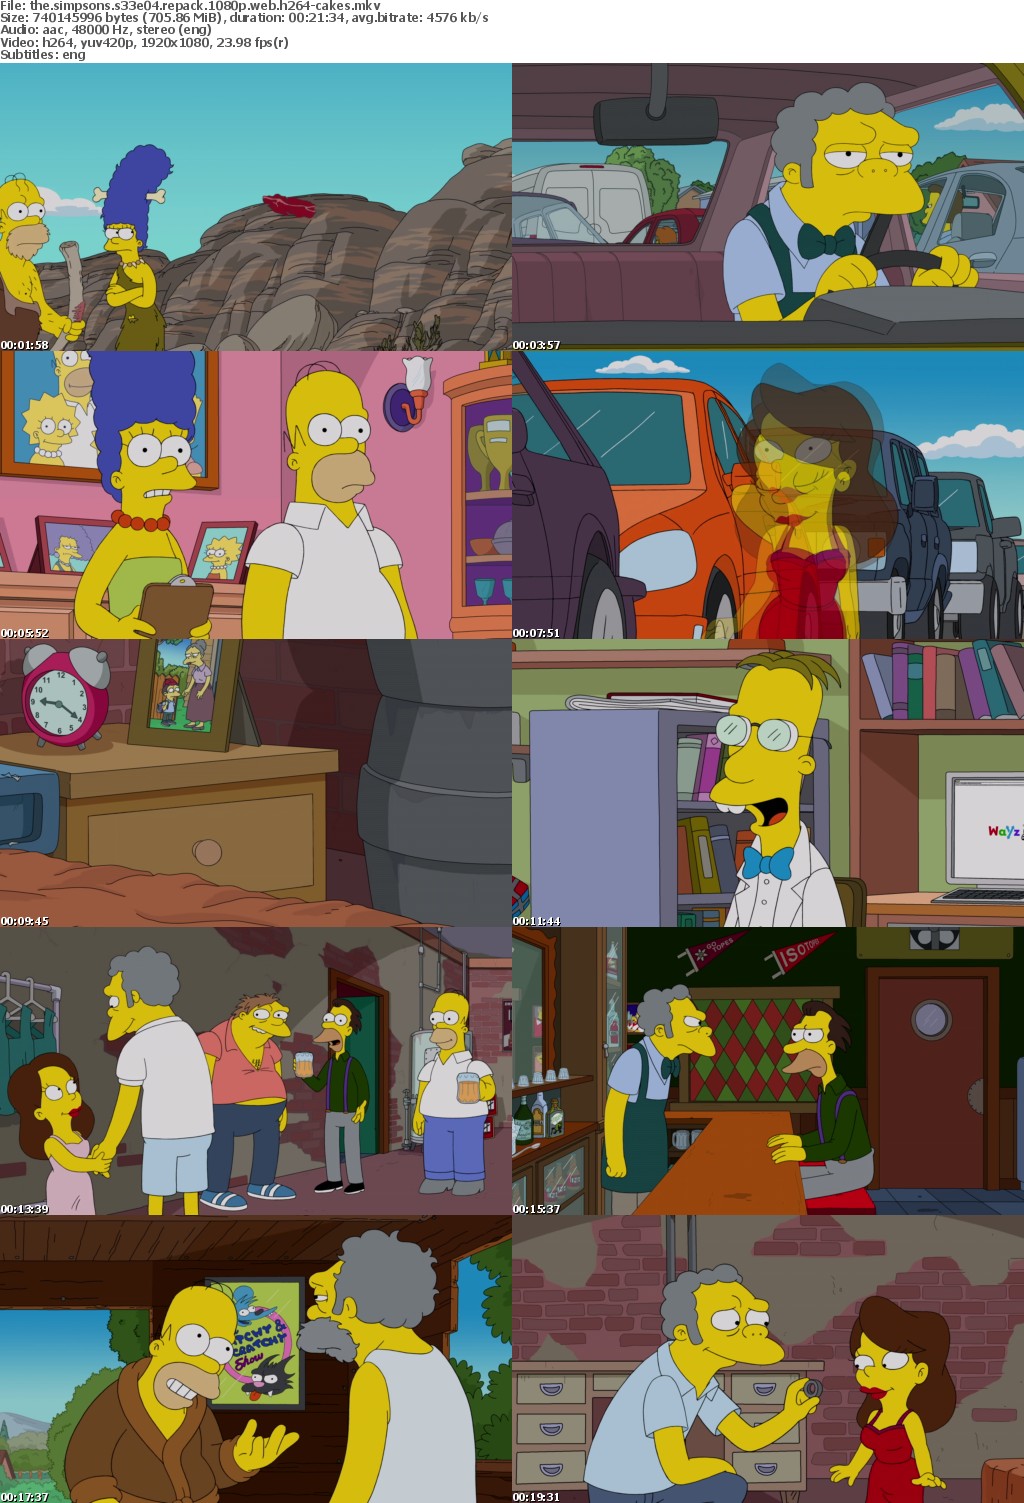 The Simpsons S33E04 REPACK 1080p WEB H264-CAKES